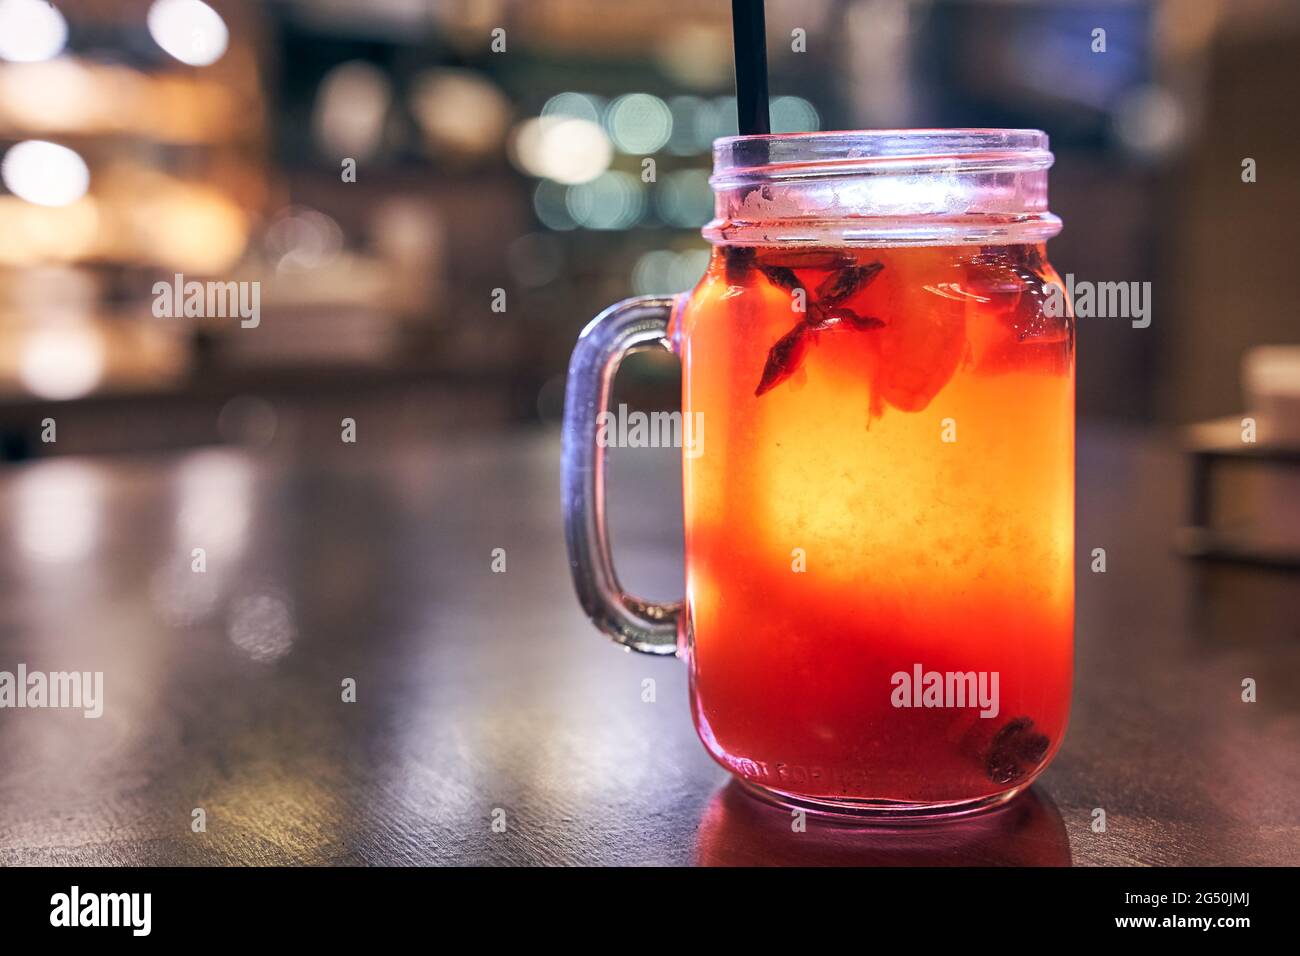 Christmas drink red non-alcoholic mulled wine with a straw on the background of the cafe interior, order for one Stock Photo